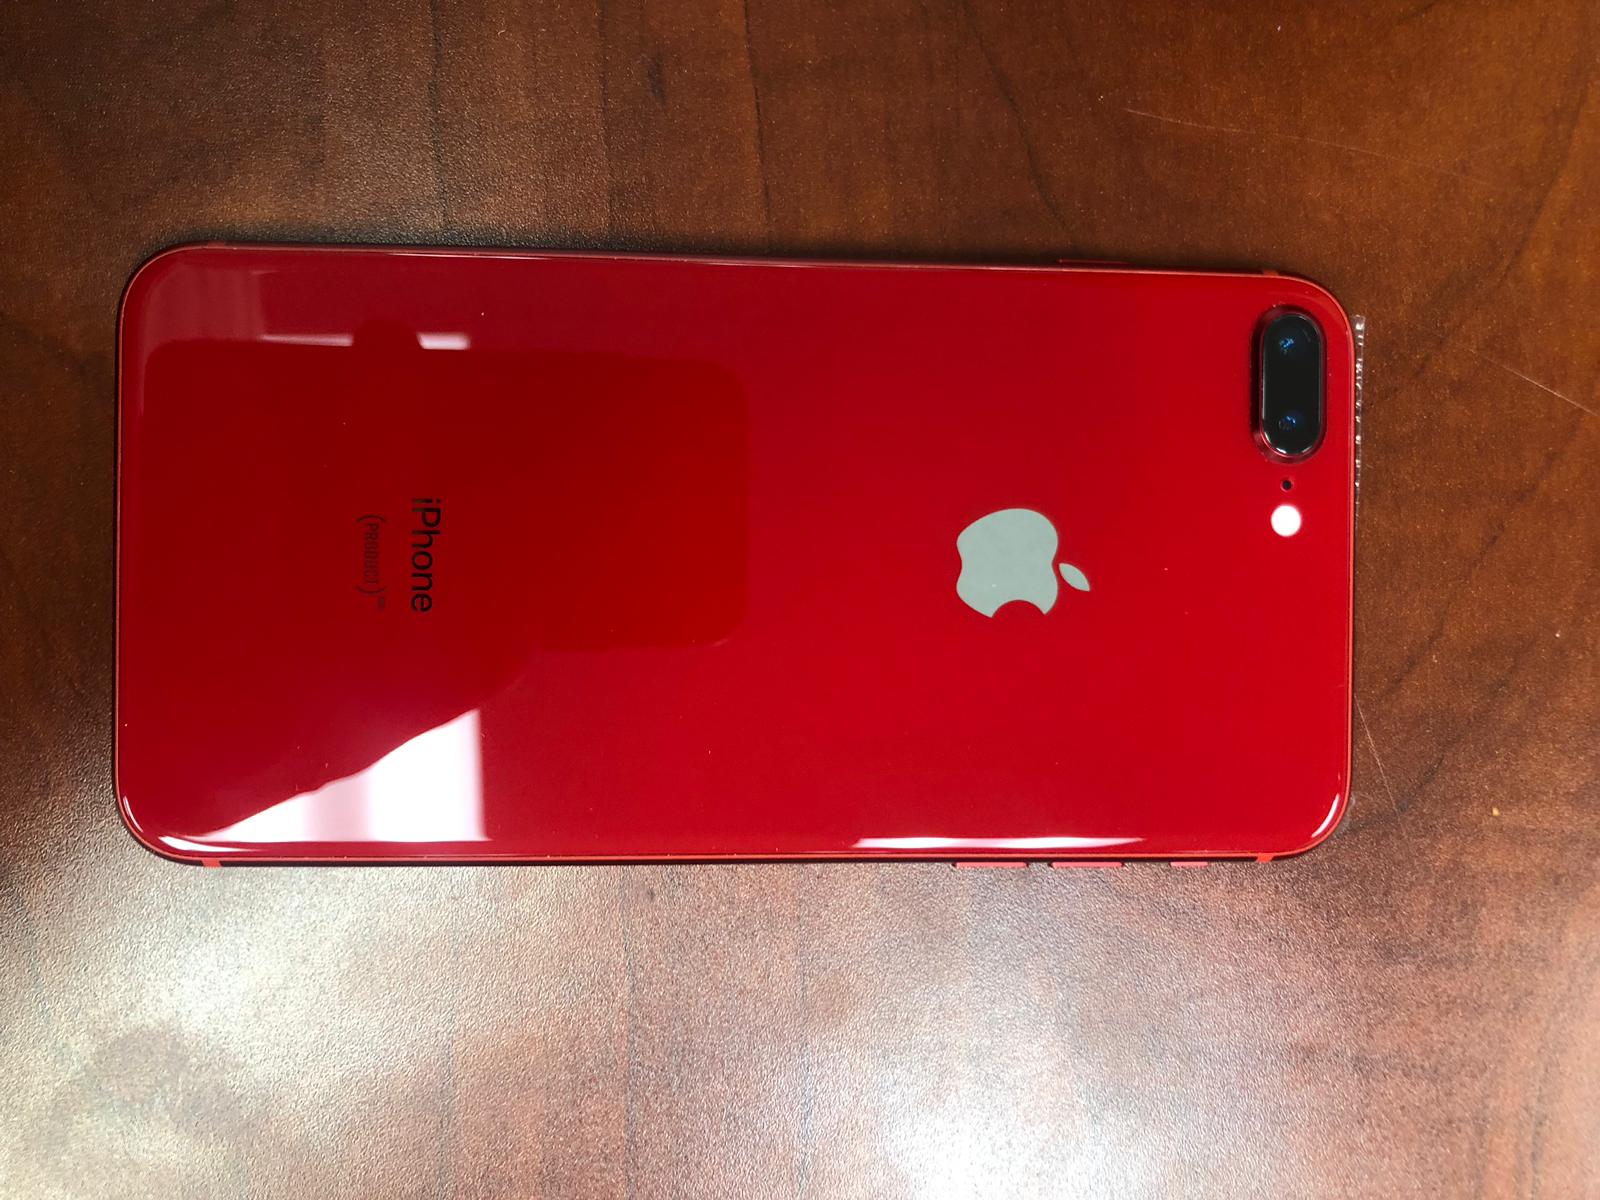 iPhone 8 Plus Product Red $525 Unlocked and 100% Tested